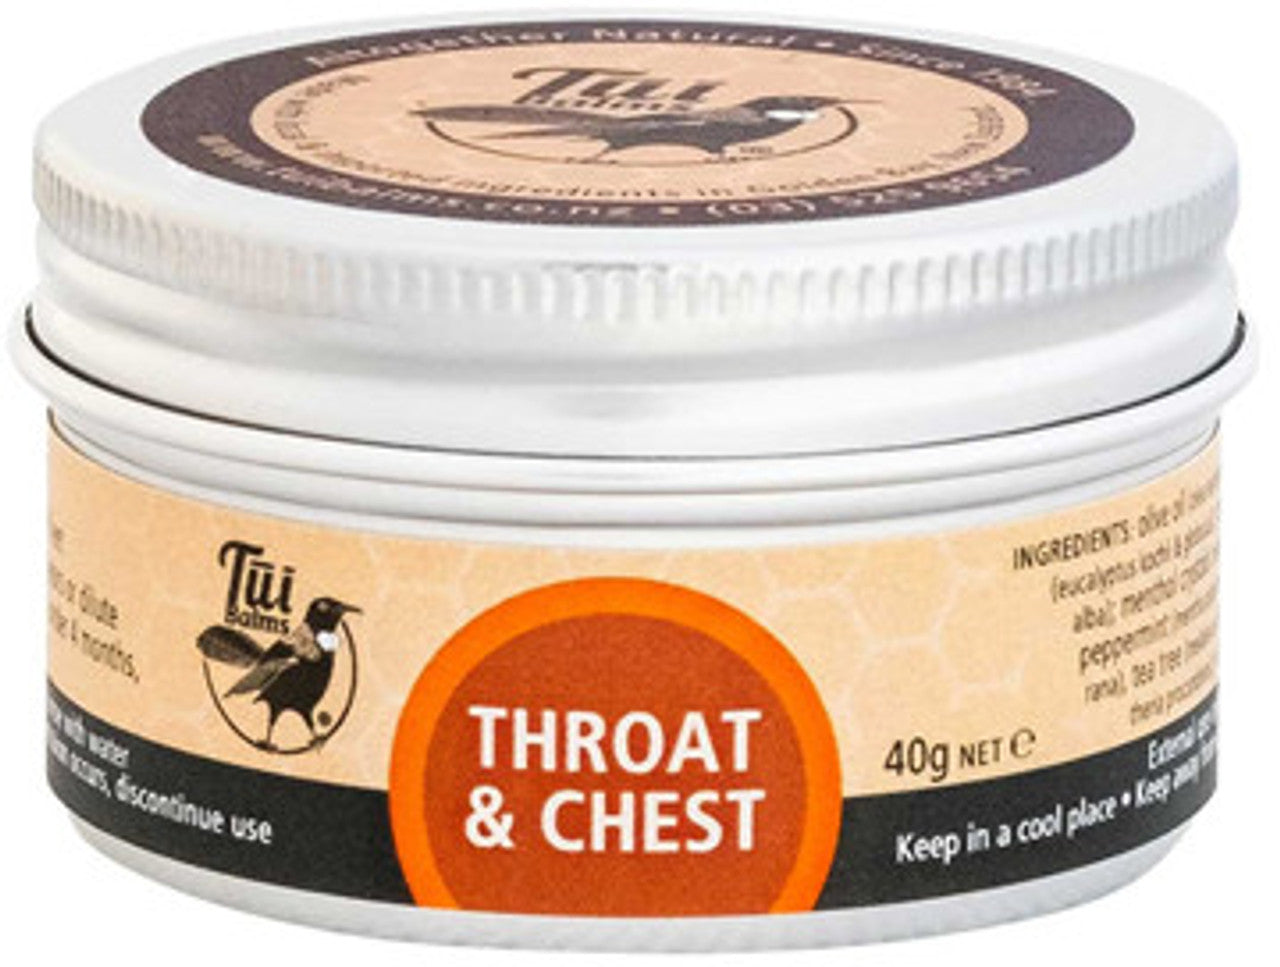 Tui Throat and Chest Balm 40g